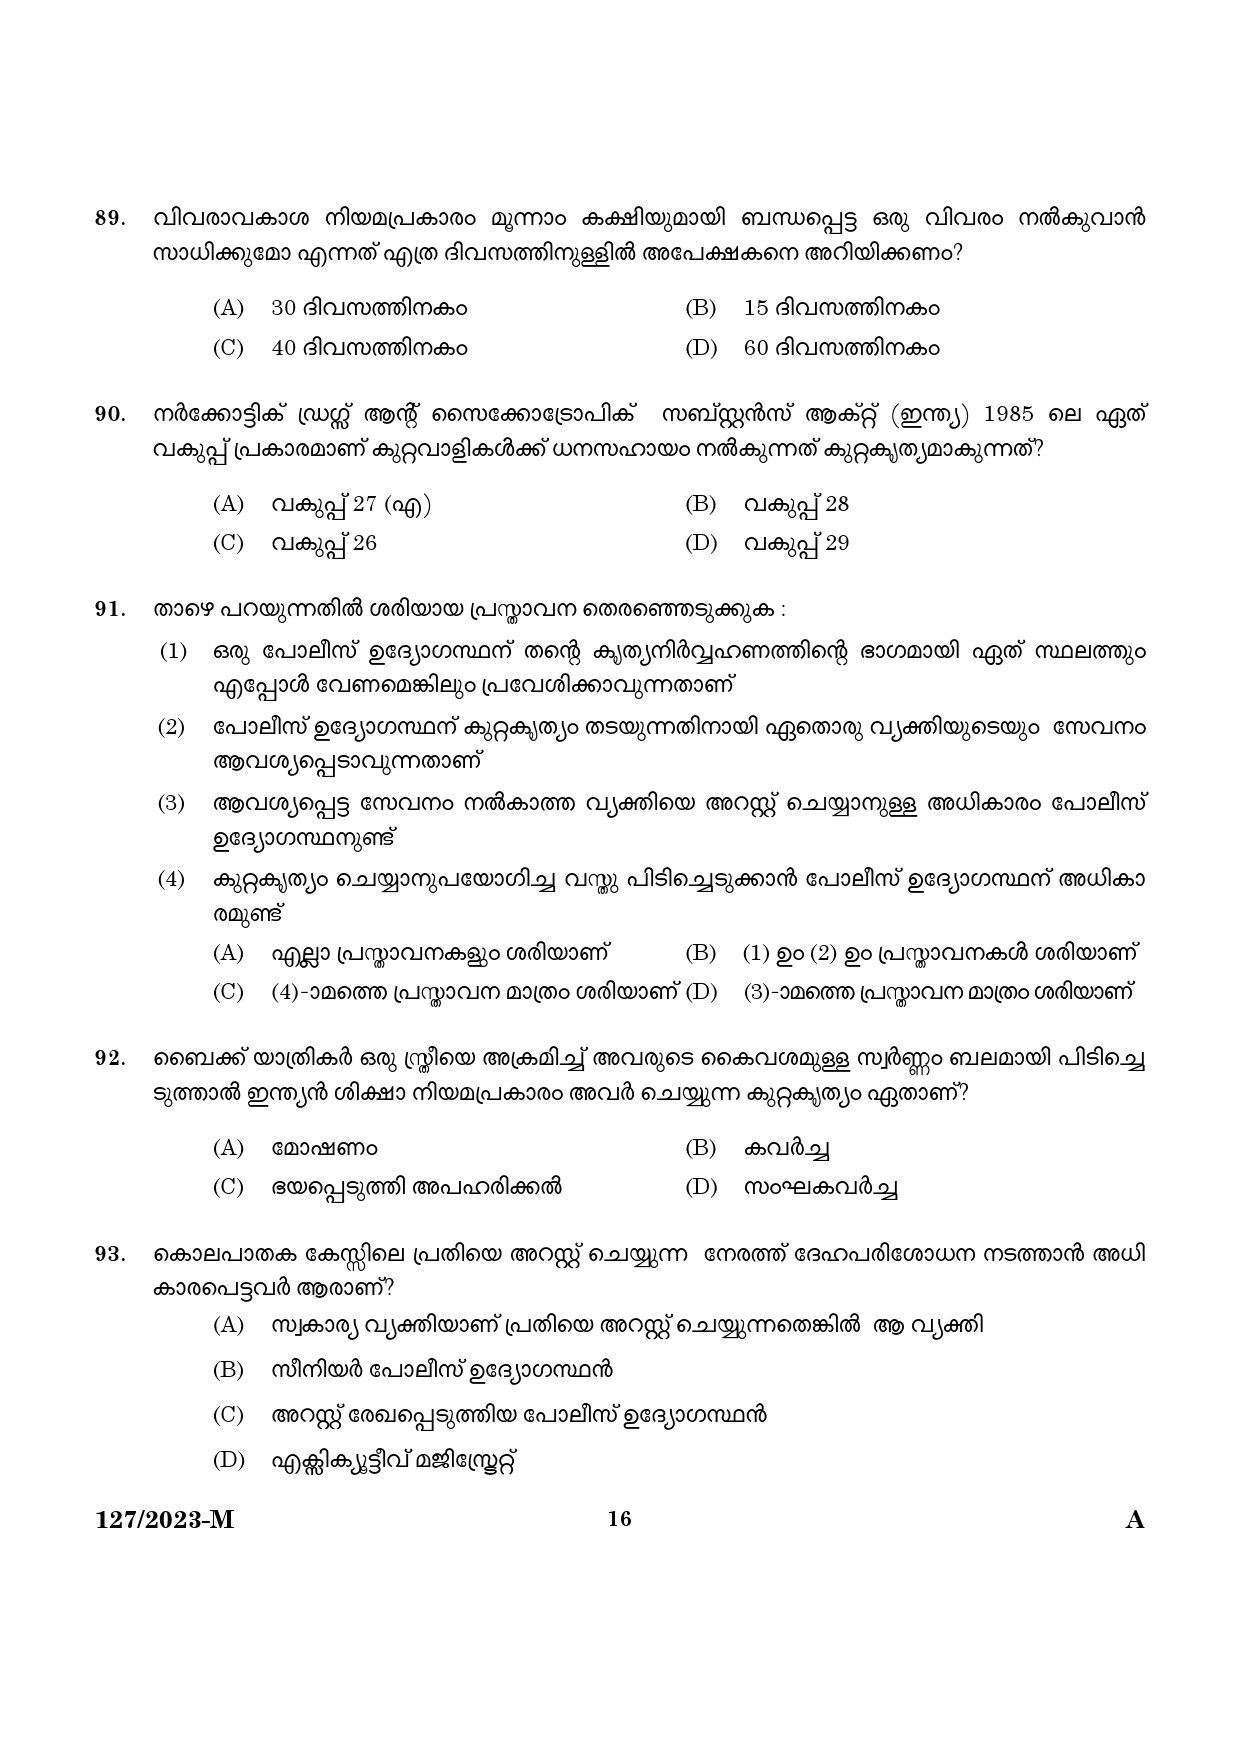 KPSC Police Constable Armed Police Battalion Malayalam Exam 2023 Code 1272023 M 14